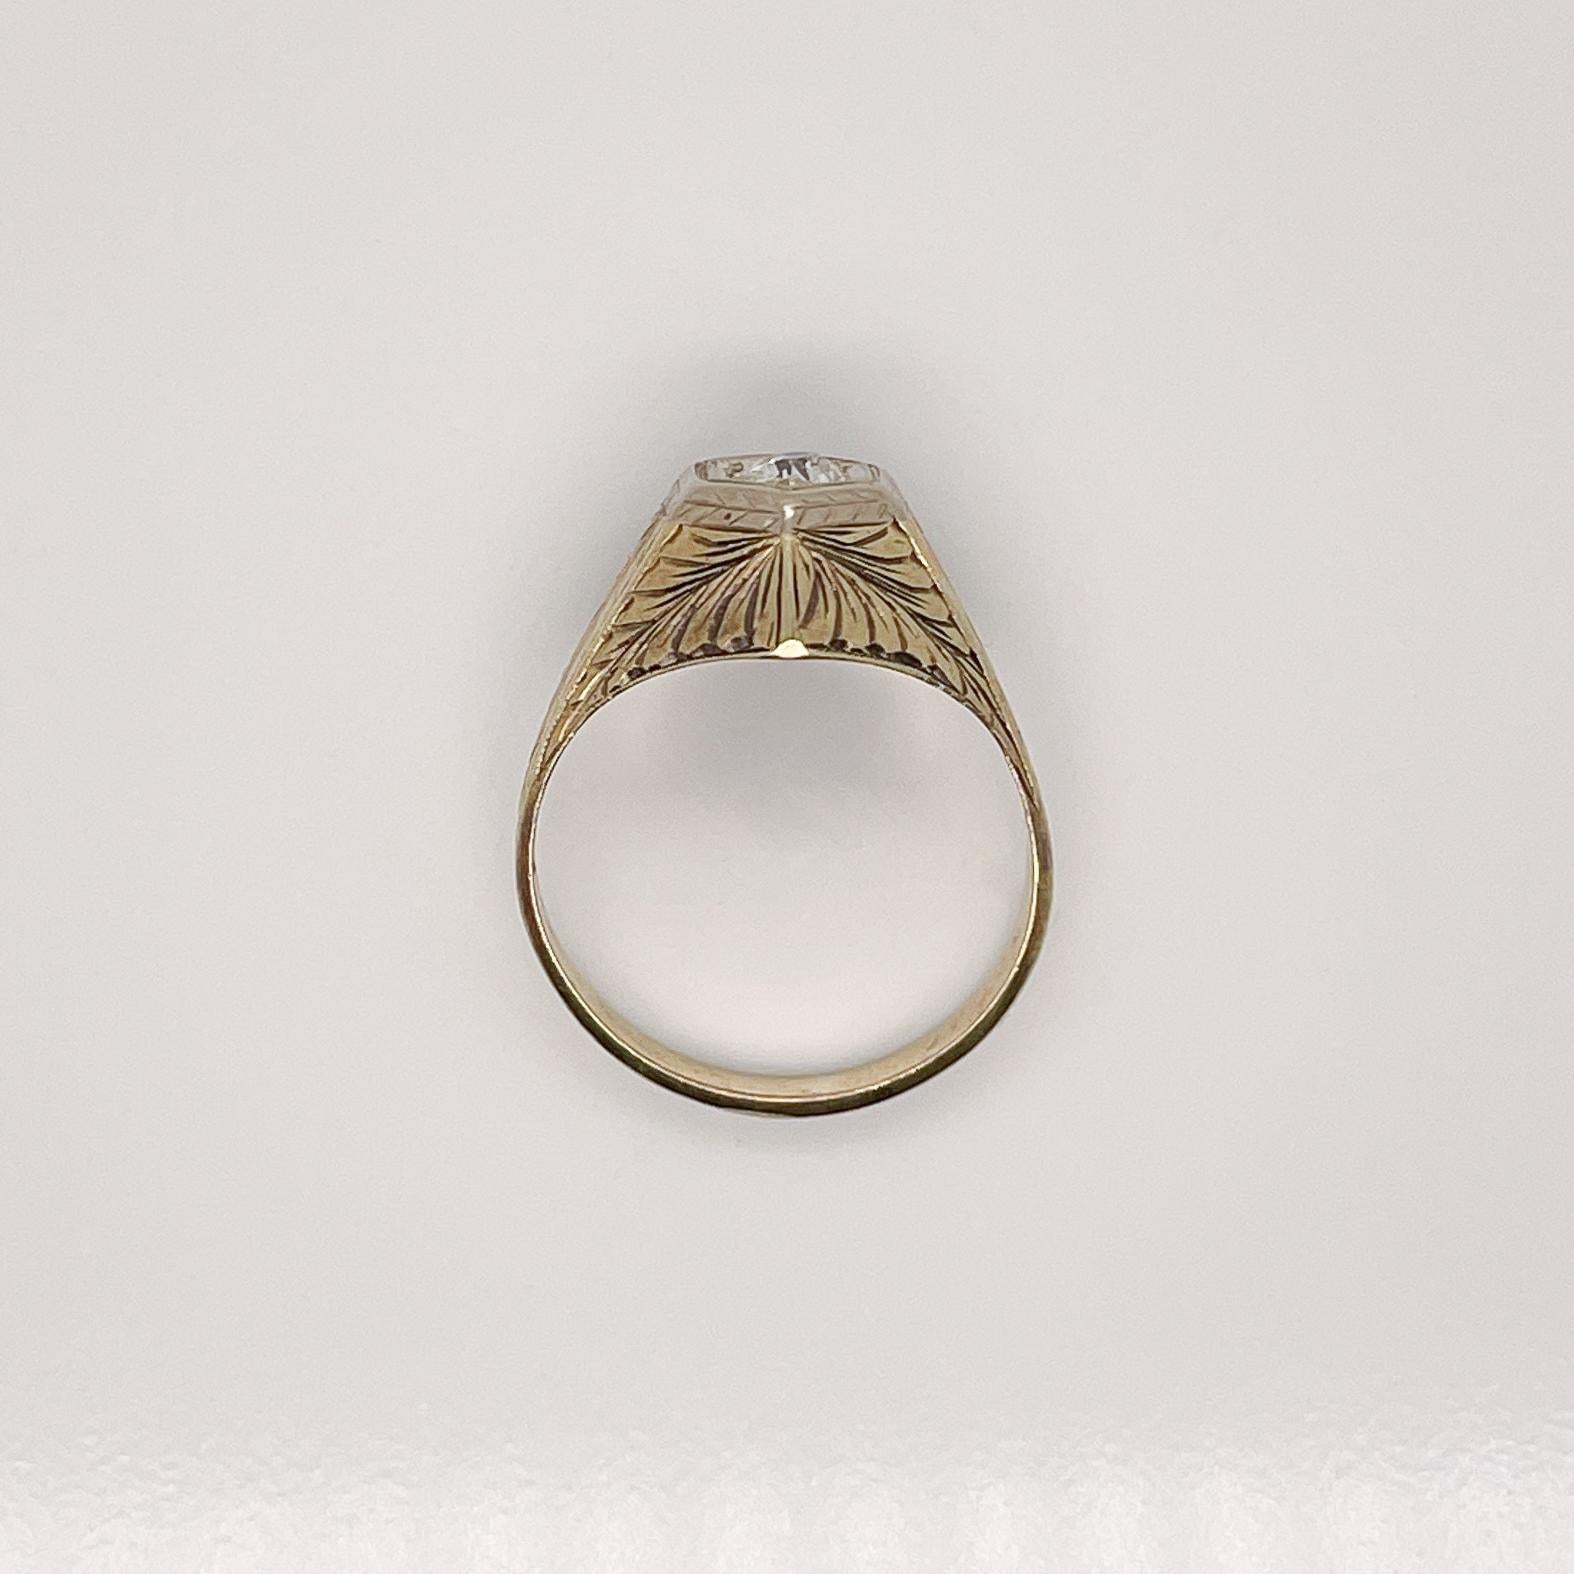 Edwardian Feather Engraved 14 Karat Gold & Old European Cut Diamond Ring In Good Condition For Sale In Philadelphia, PA